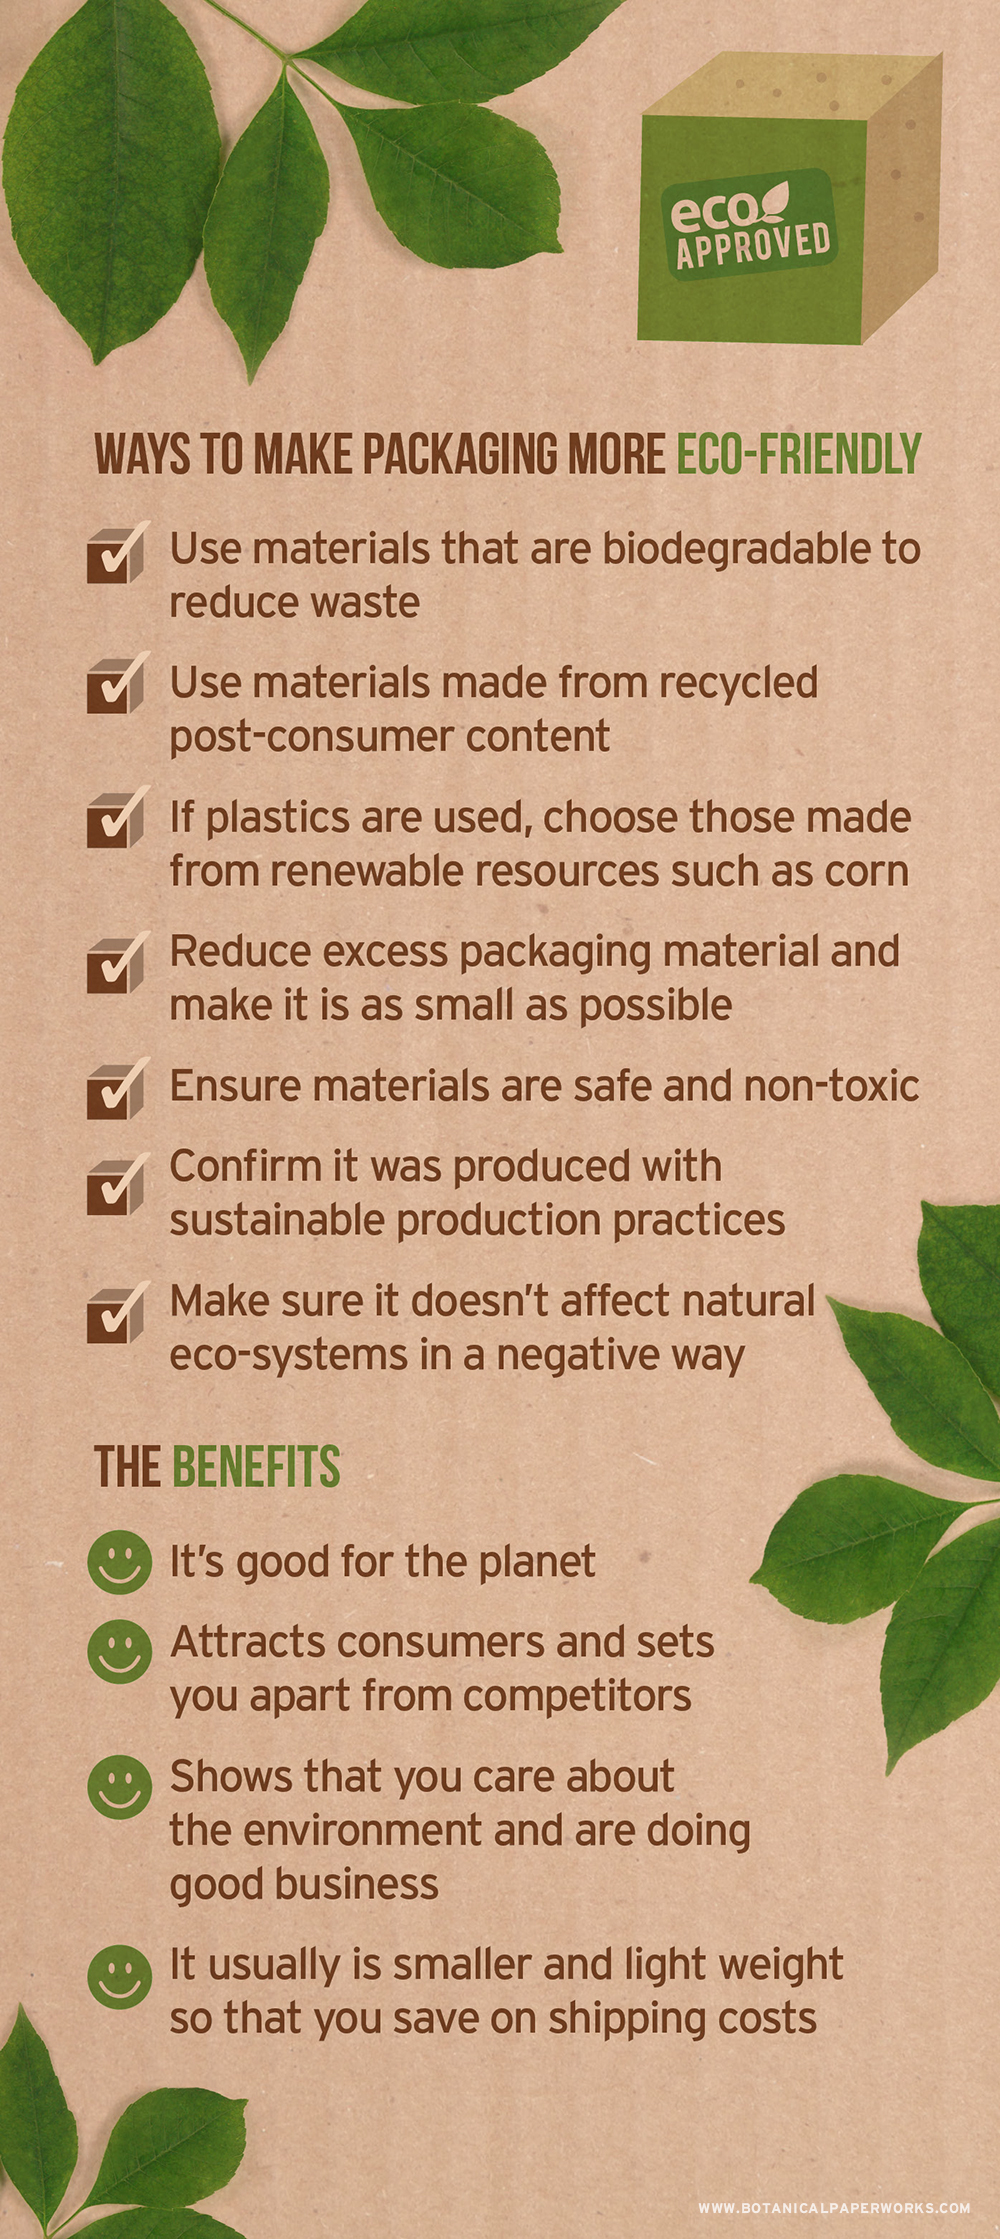 Learn how you can reduce your carbon footprint and send a green message by choosing sustainable eco packaging.